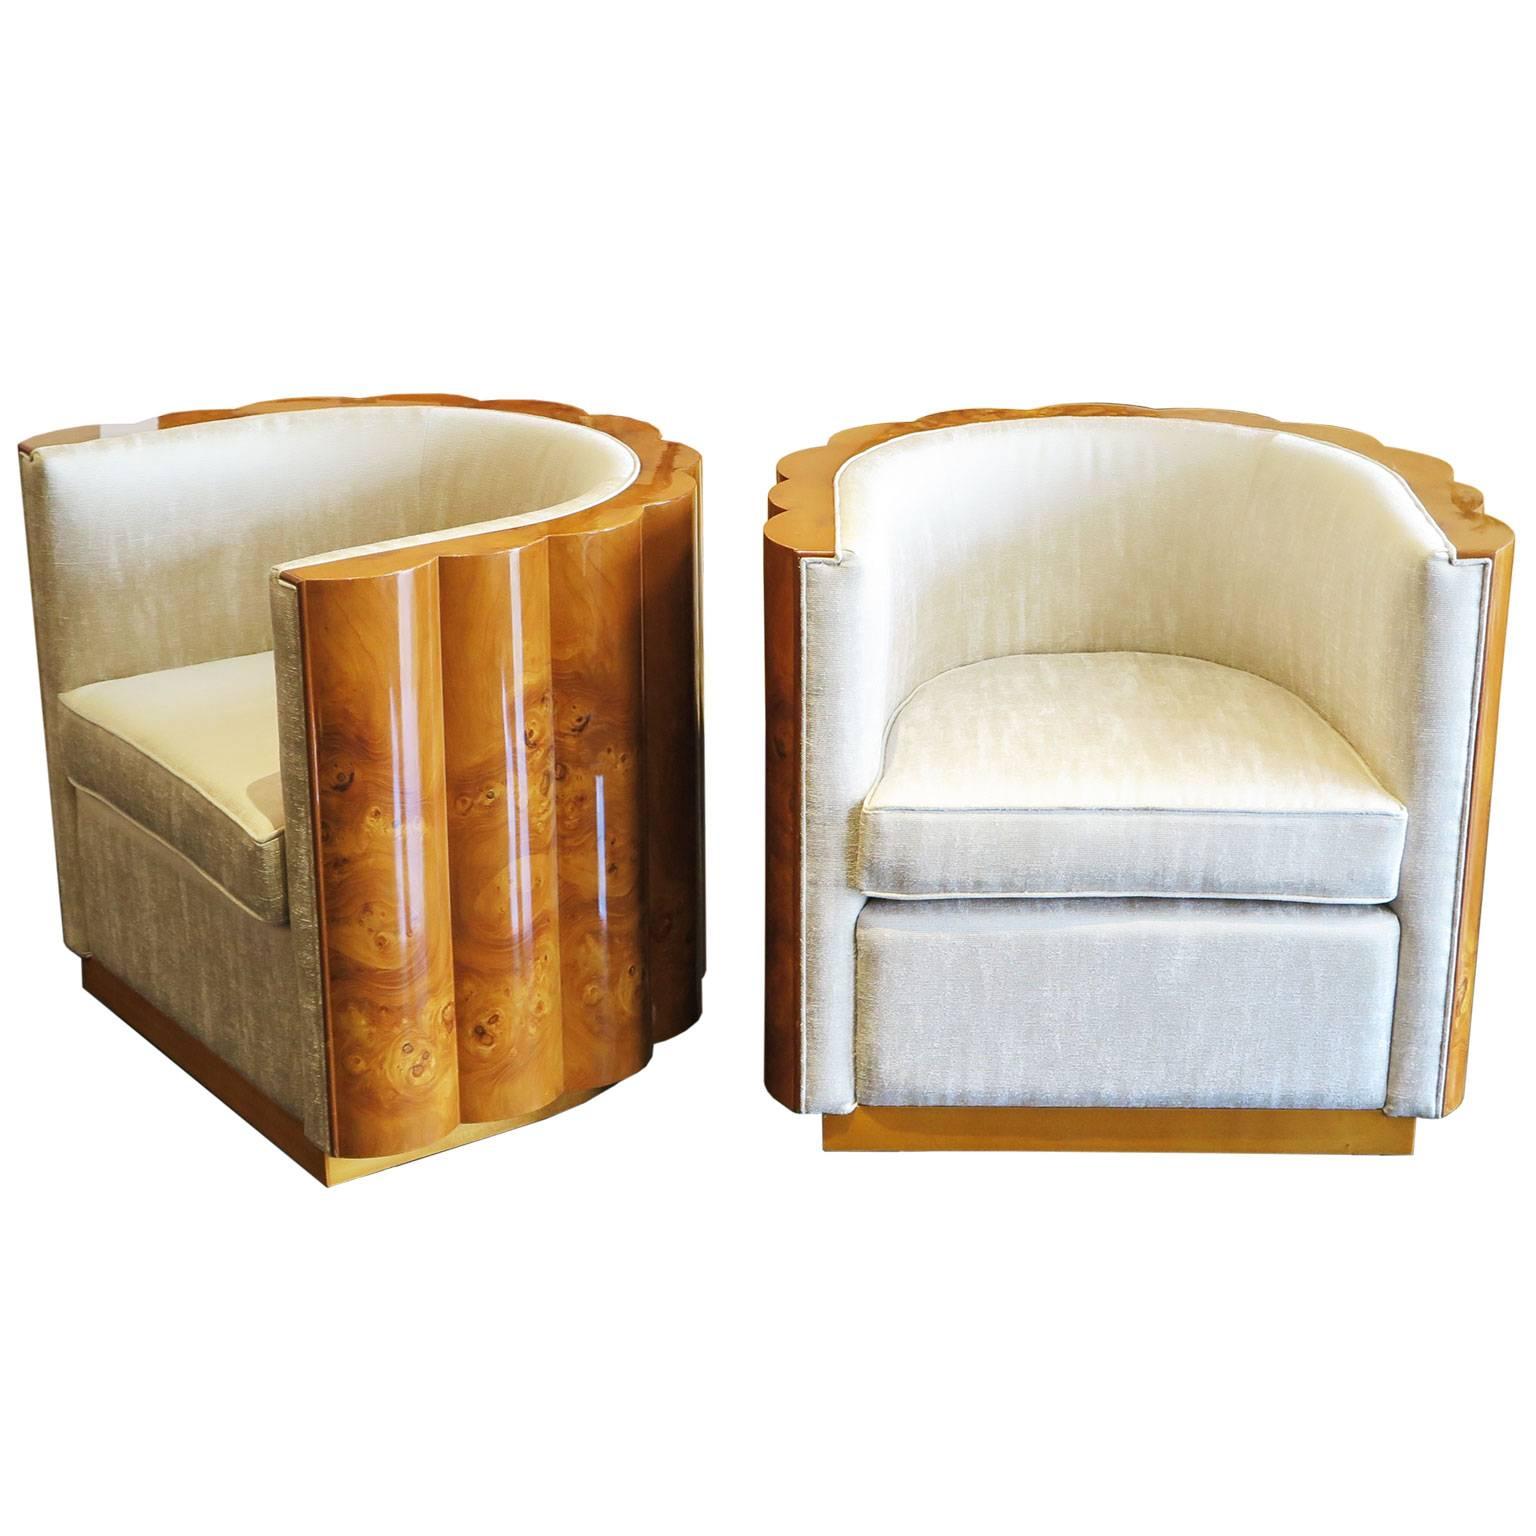 Pair of Elm Burl Barrel Chairs in the Style of Art Deco